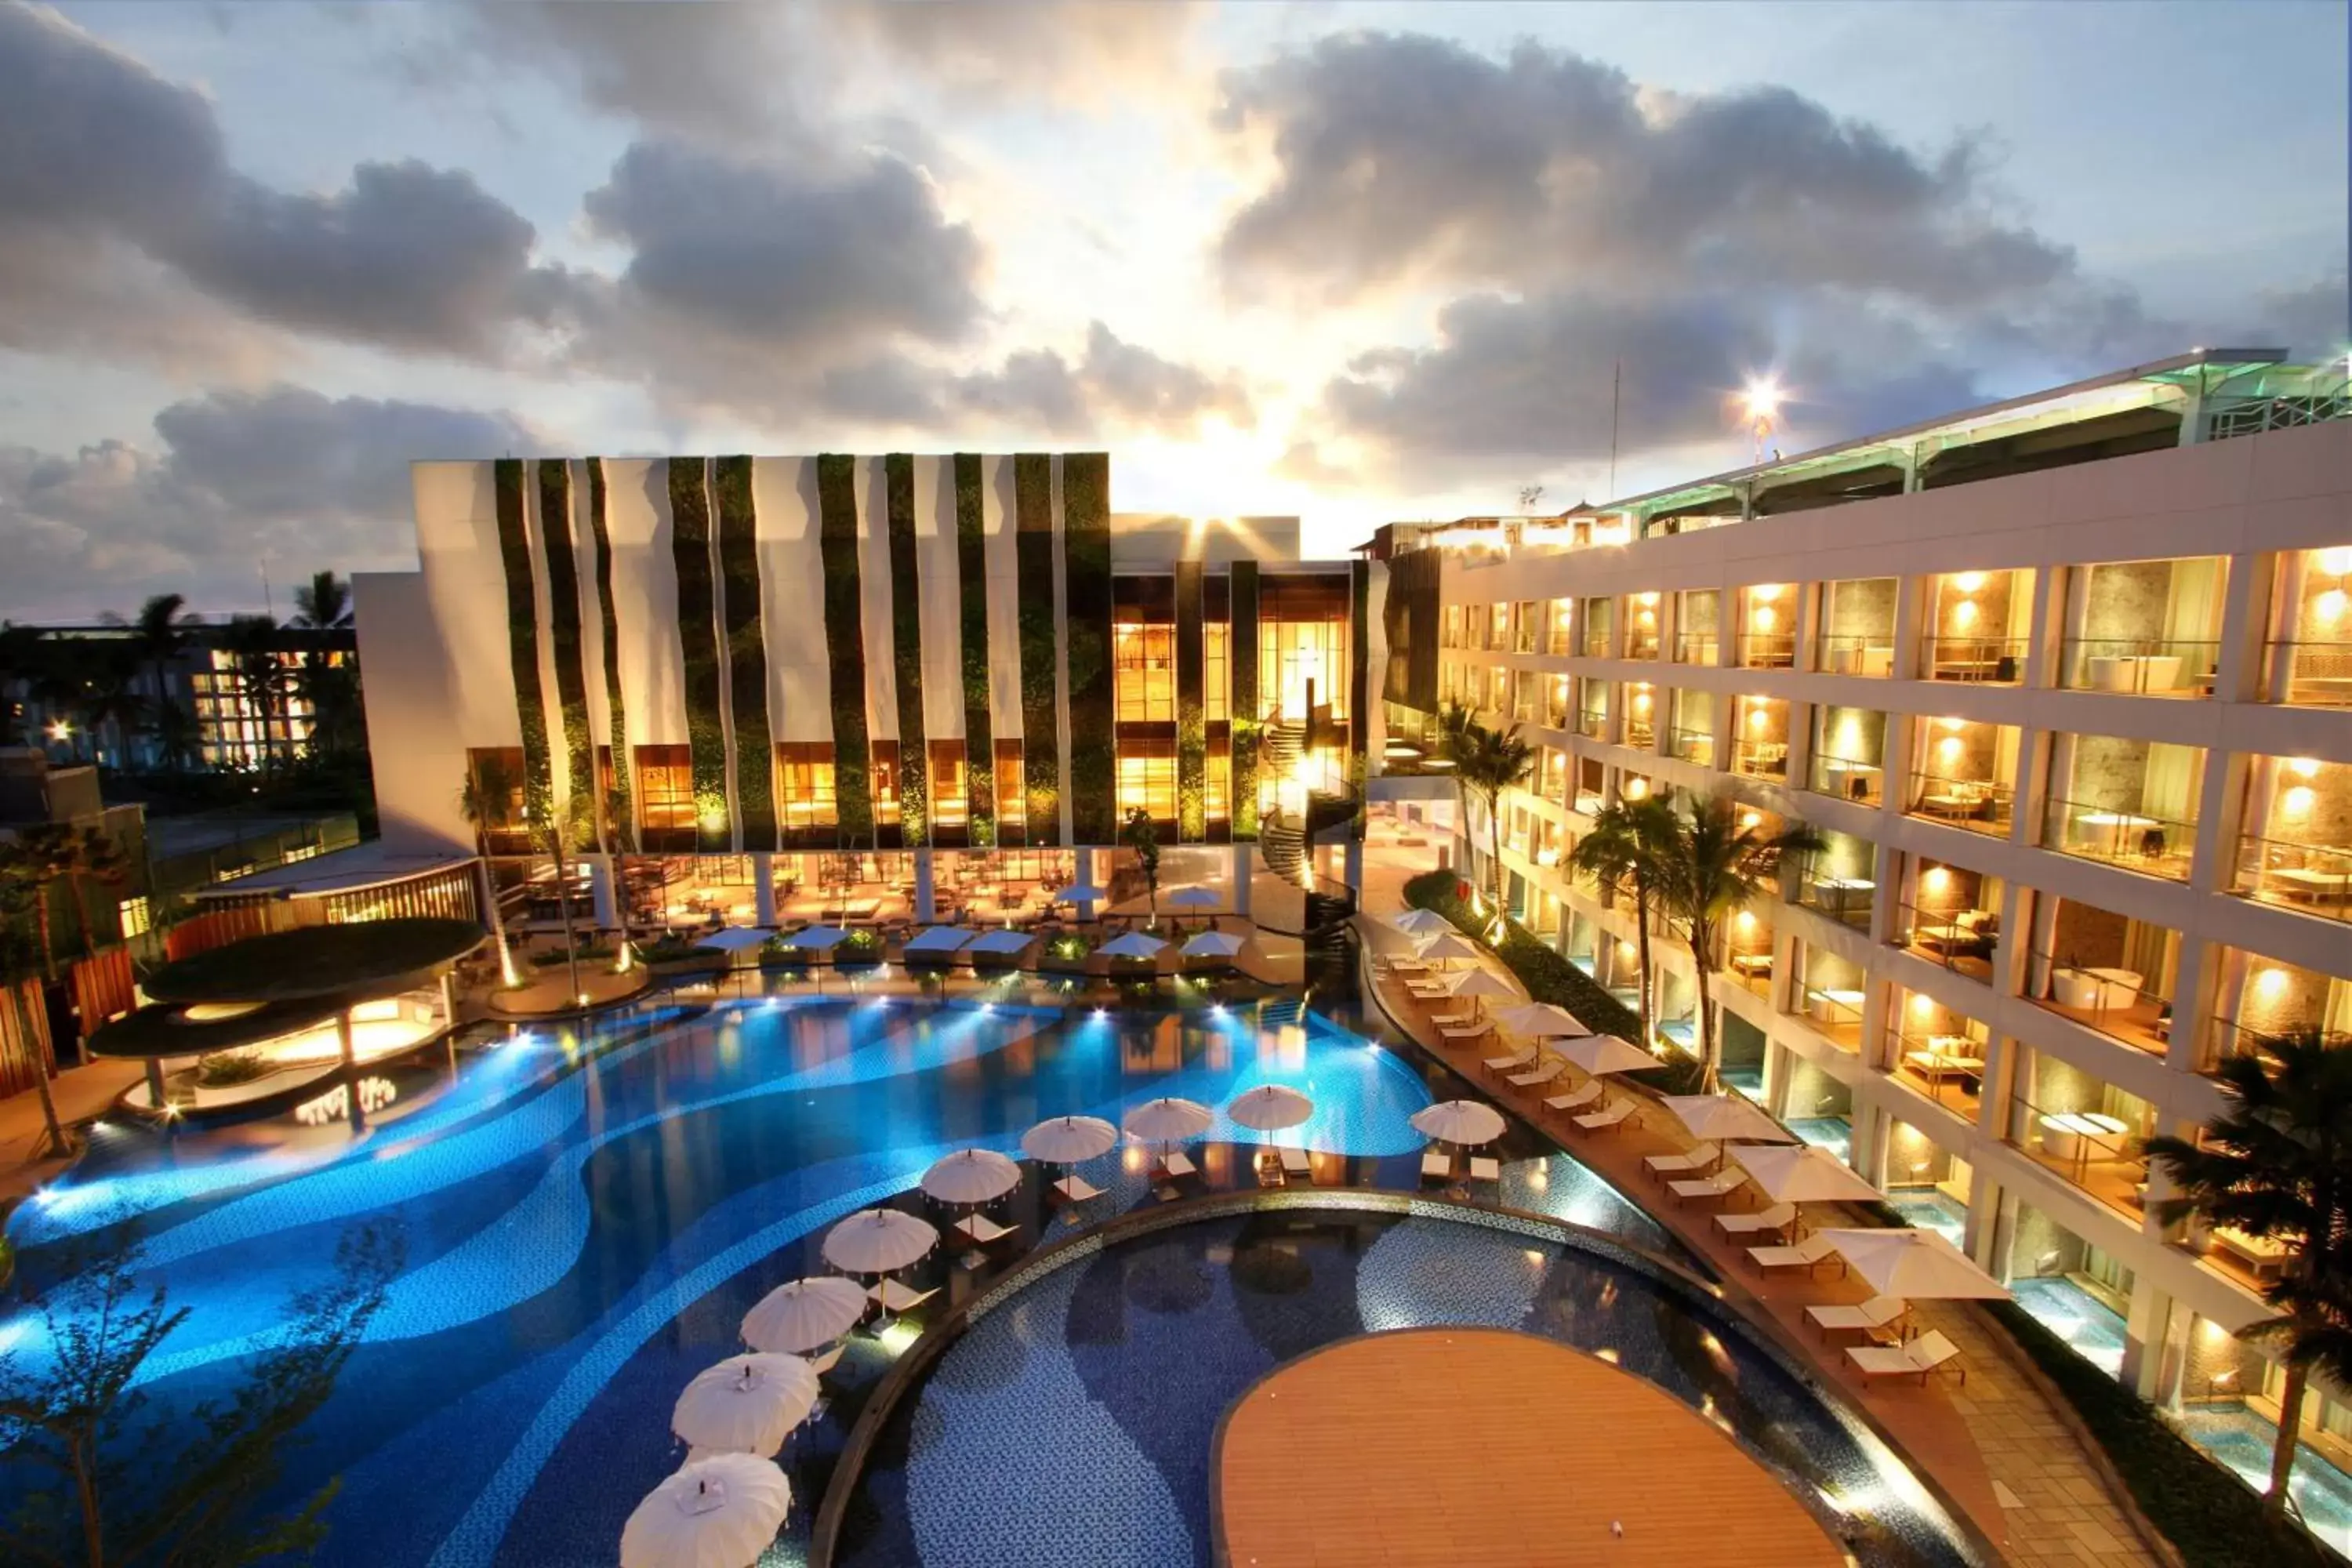 Property building, Pool View in The Stones - Legian, Bali - A Marriott Autograph Collection Hotel